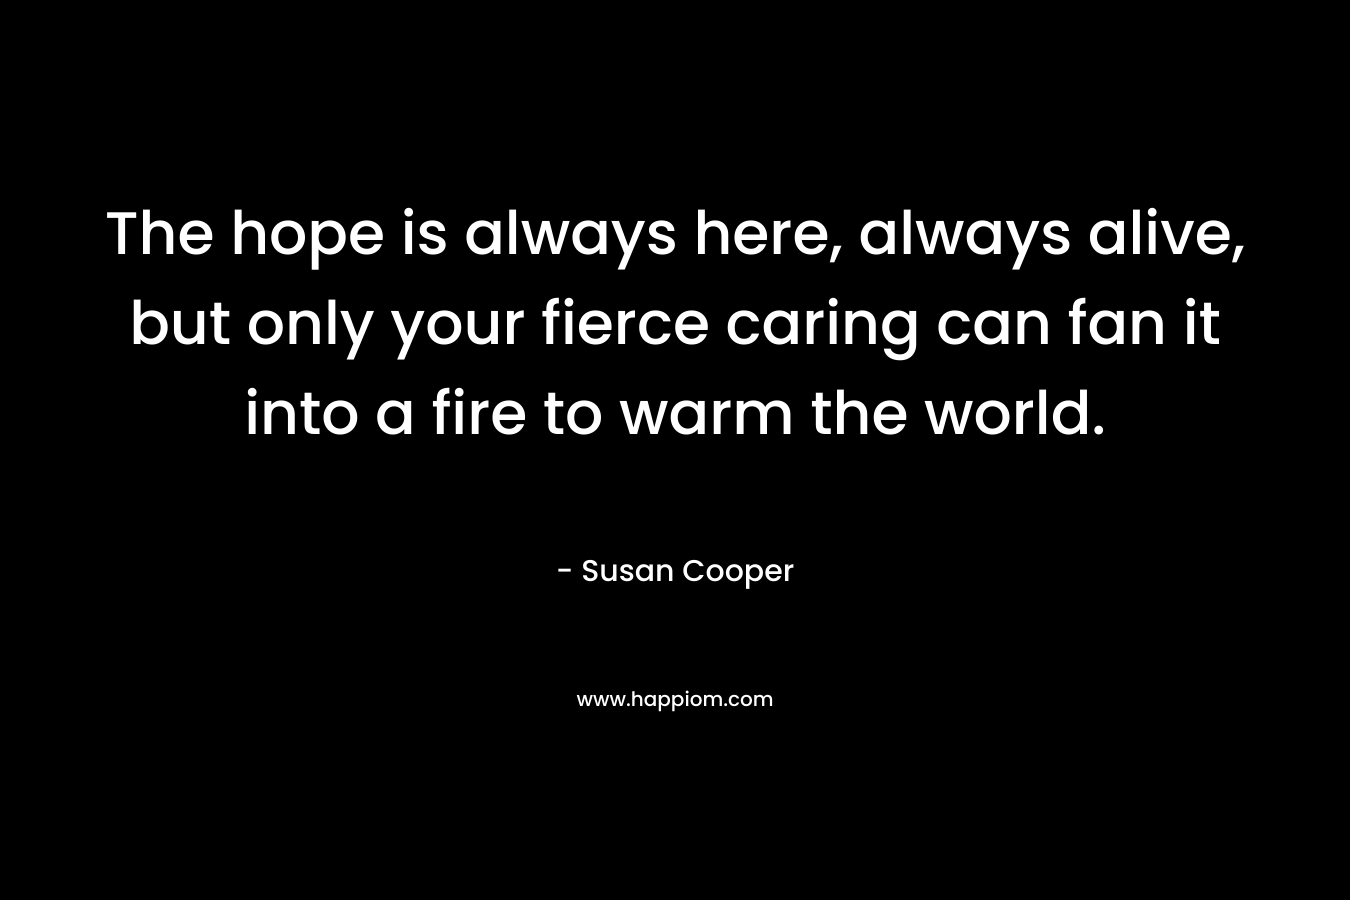 The hope is always here, always alive, but only your fierce caring can fan it into a fire to warm the world.